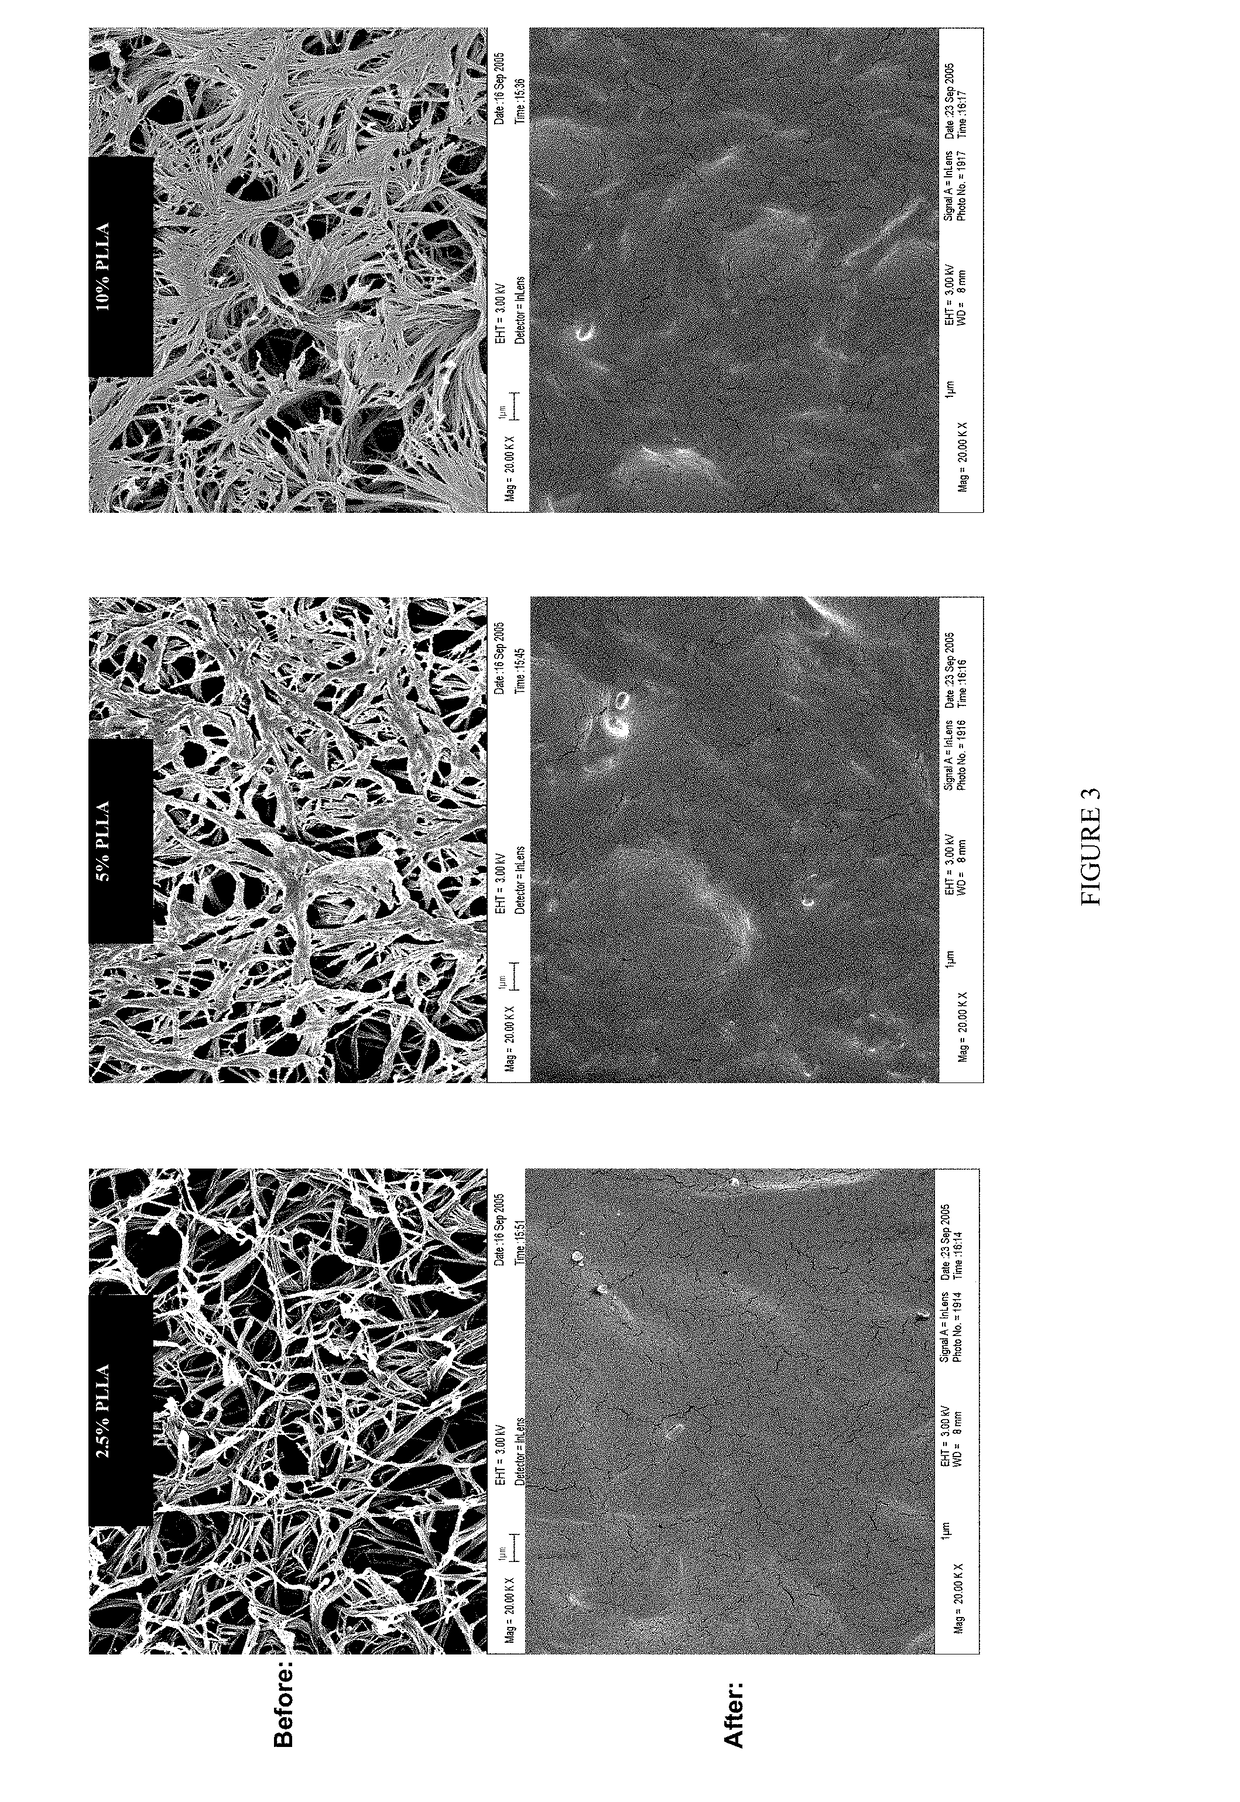 Biodegradable nanocomposites with enhanced mechanical properties for soft tissue engineering